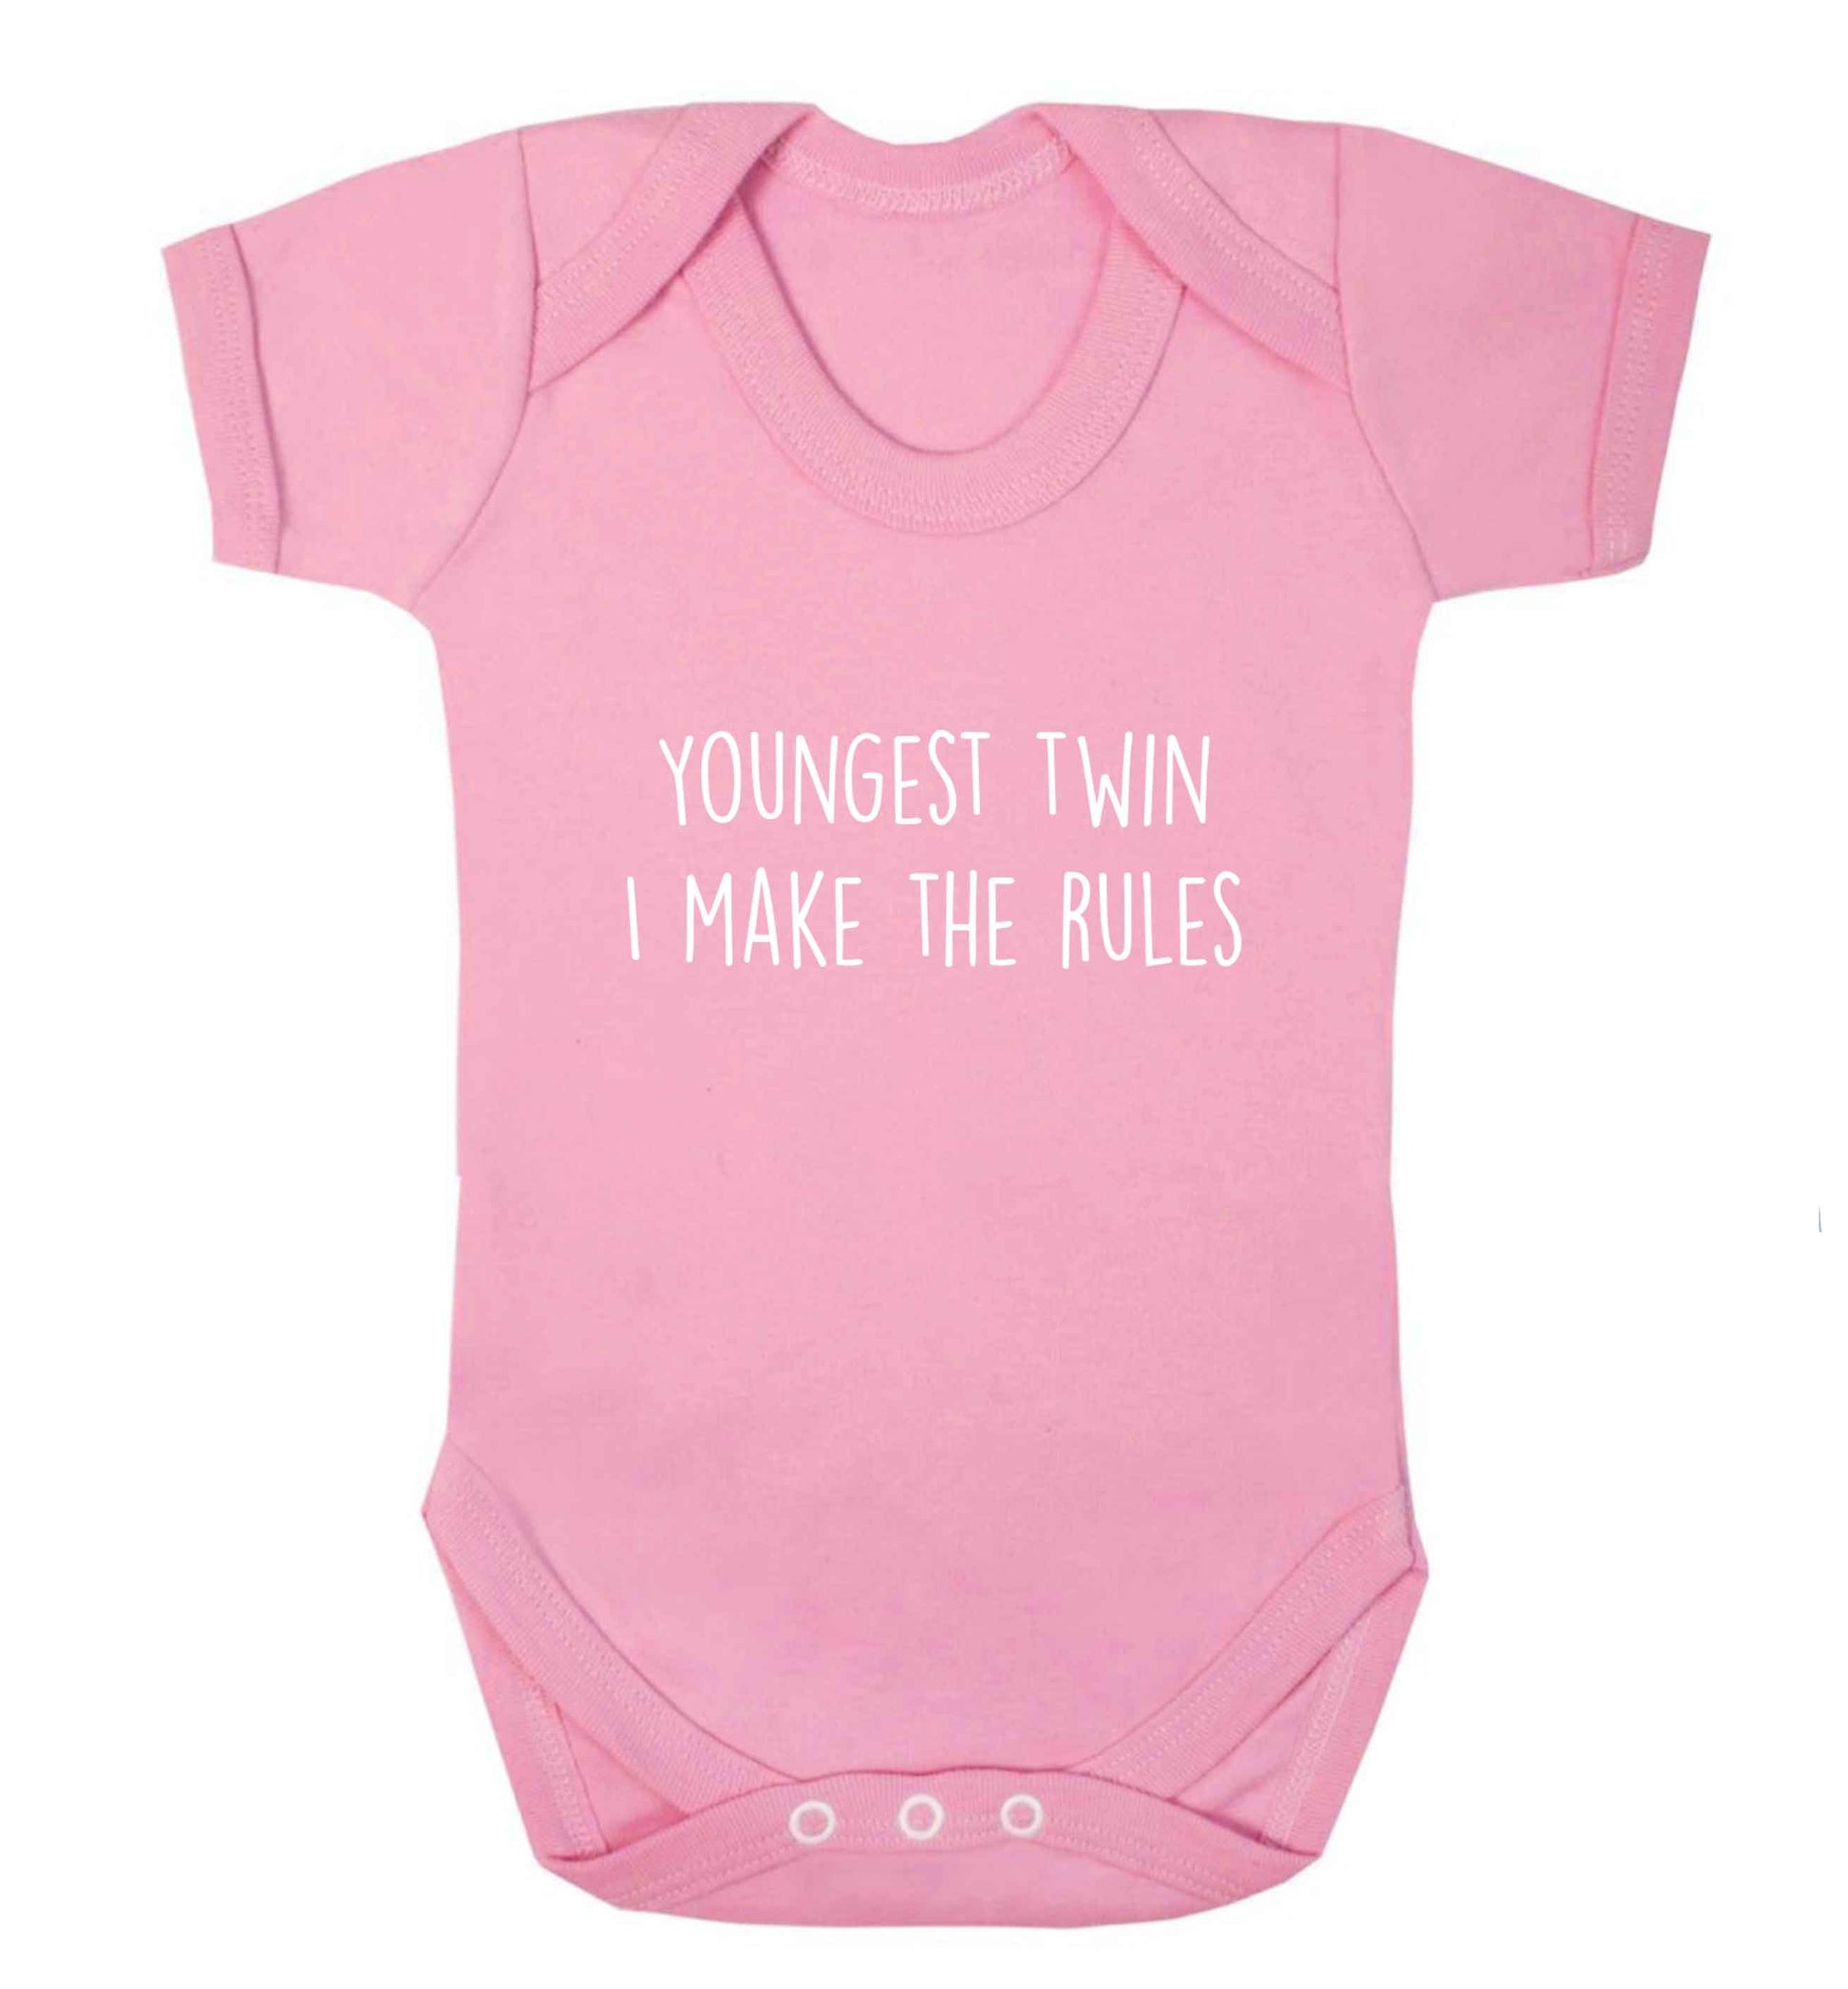 Youngest twin I make the rules baby vest pale pink 18-24 months